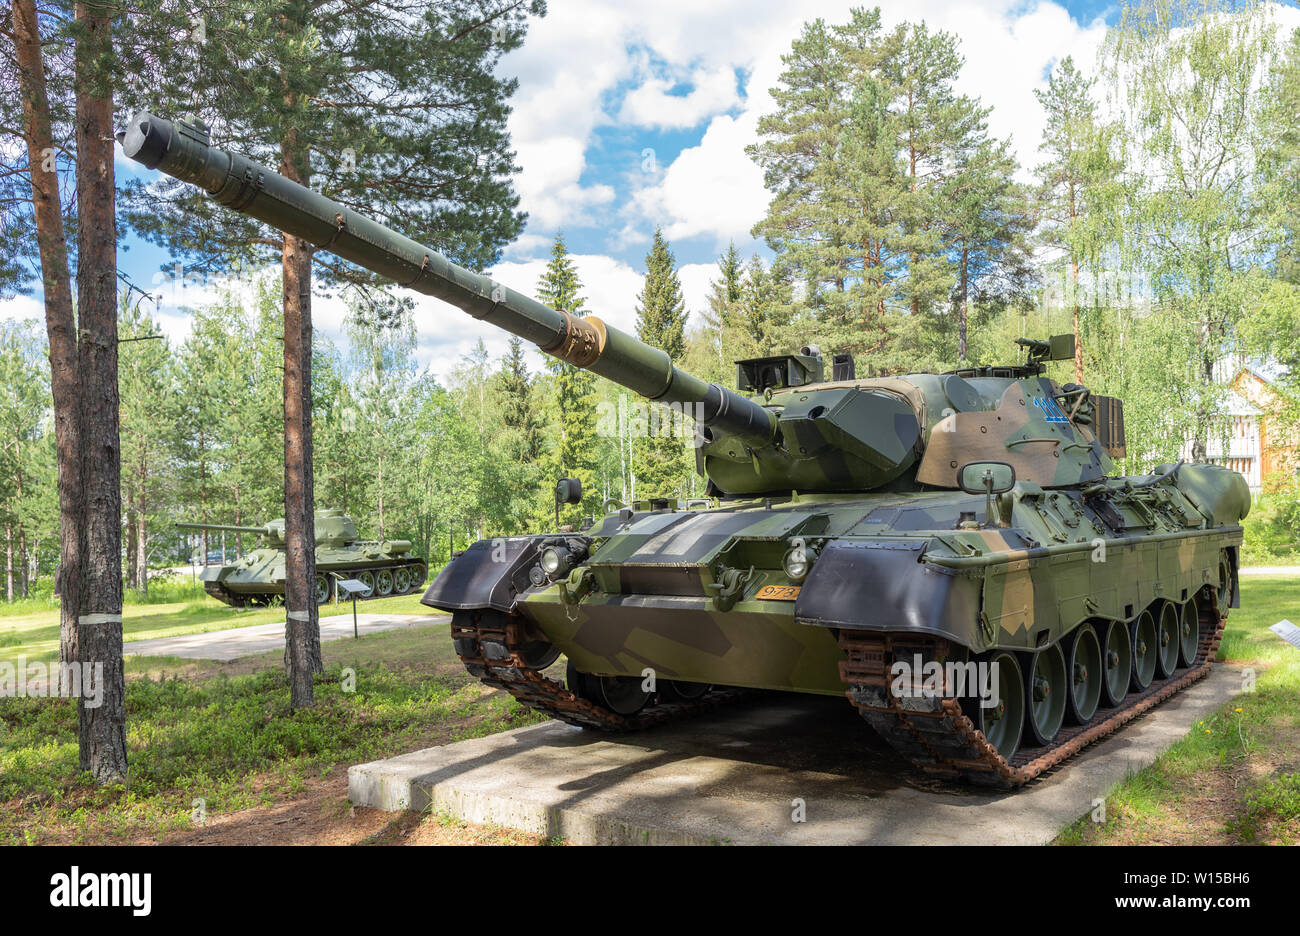 Retired German-made Leopard 1A1 main battle tank of the Norwegian Army, displayed in a tank park in Rena Leir, Norway. Stock Photo